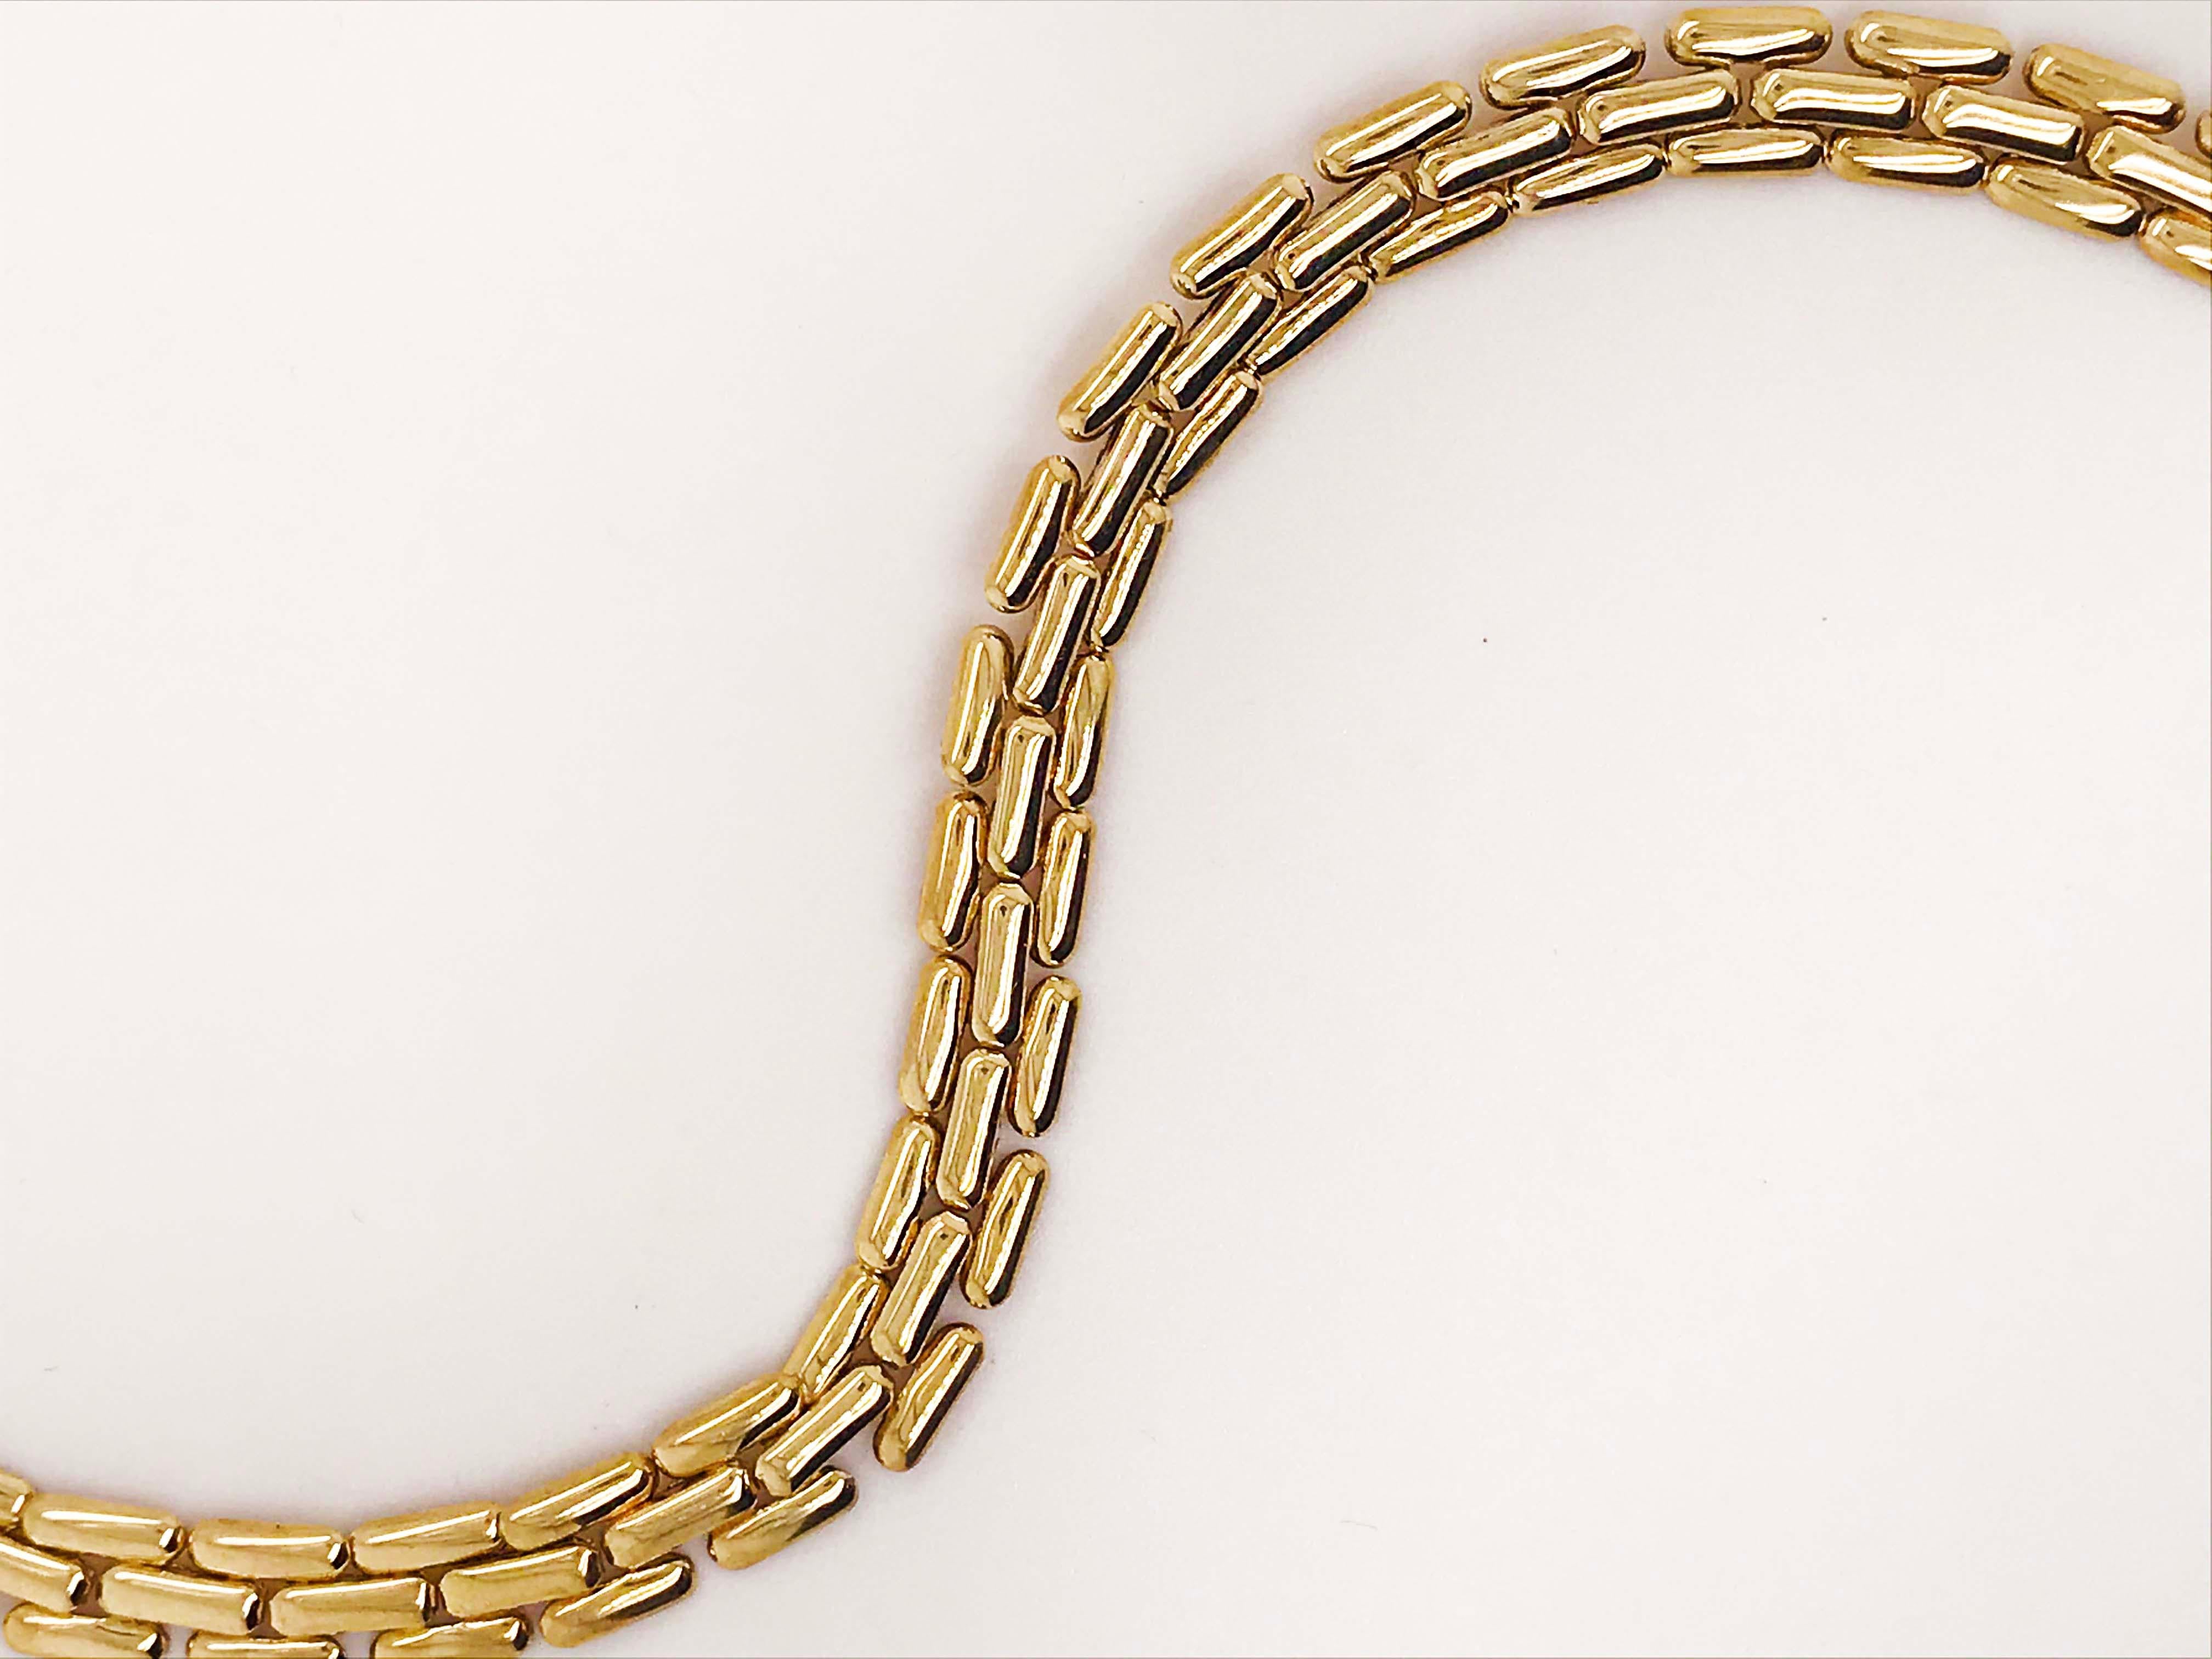 Women's or Men's Gold Panther Chain Bracelet with Large Lobster Clasp, 14 Karat Yellow Gold